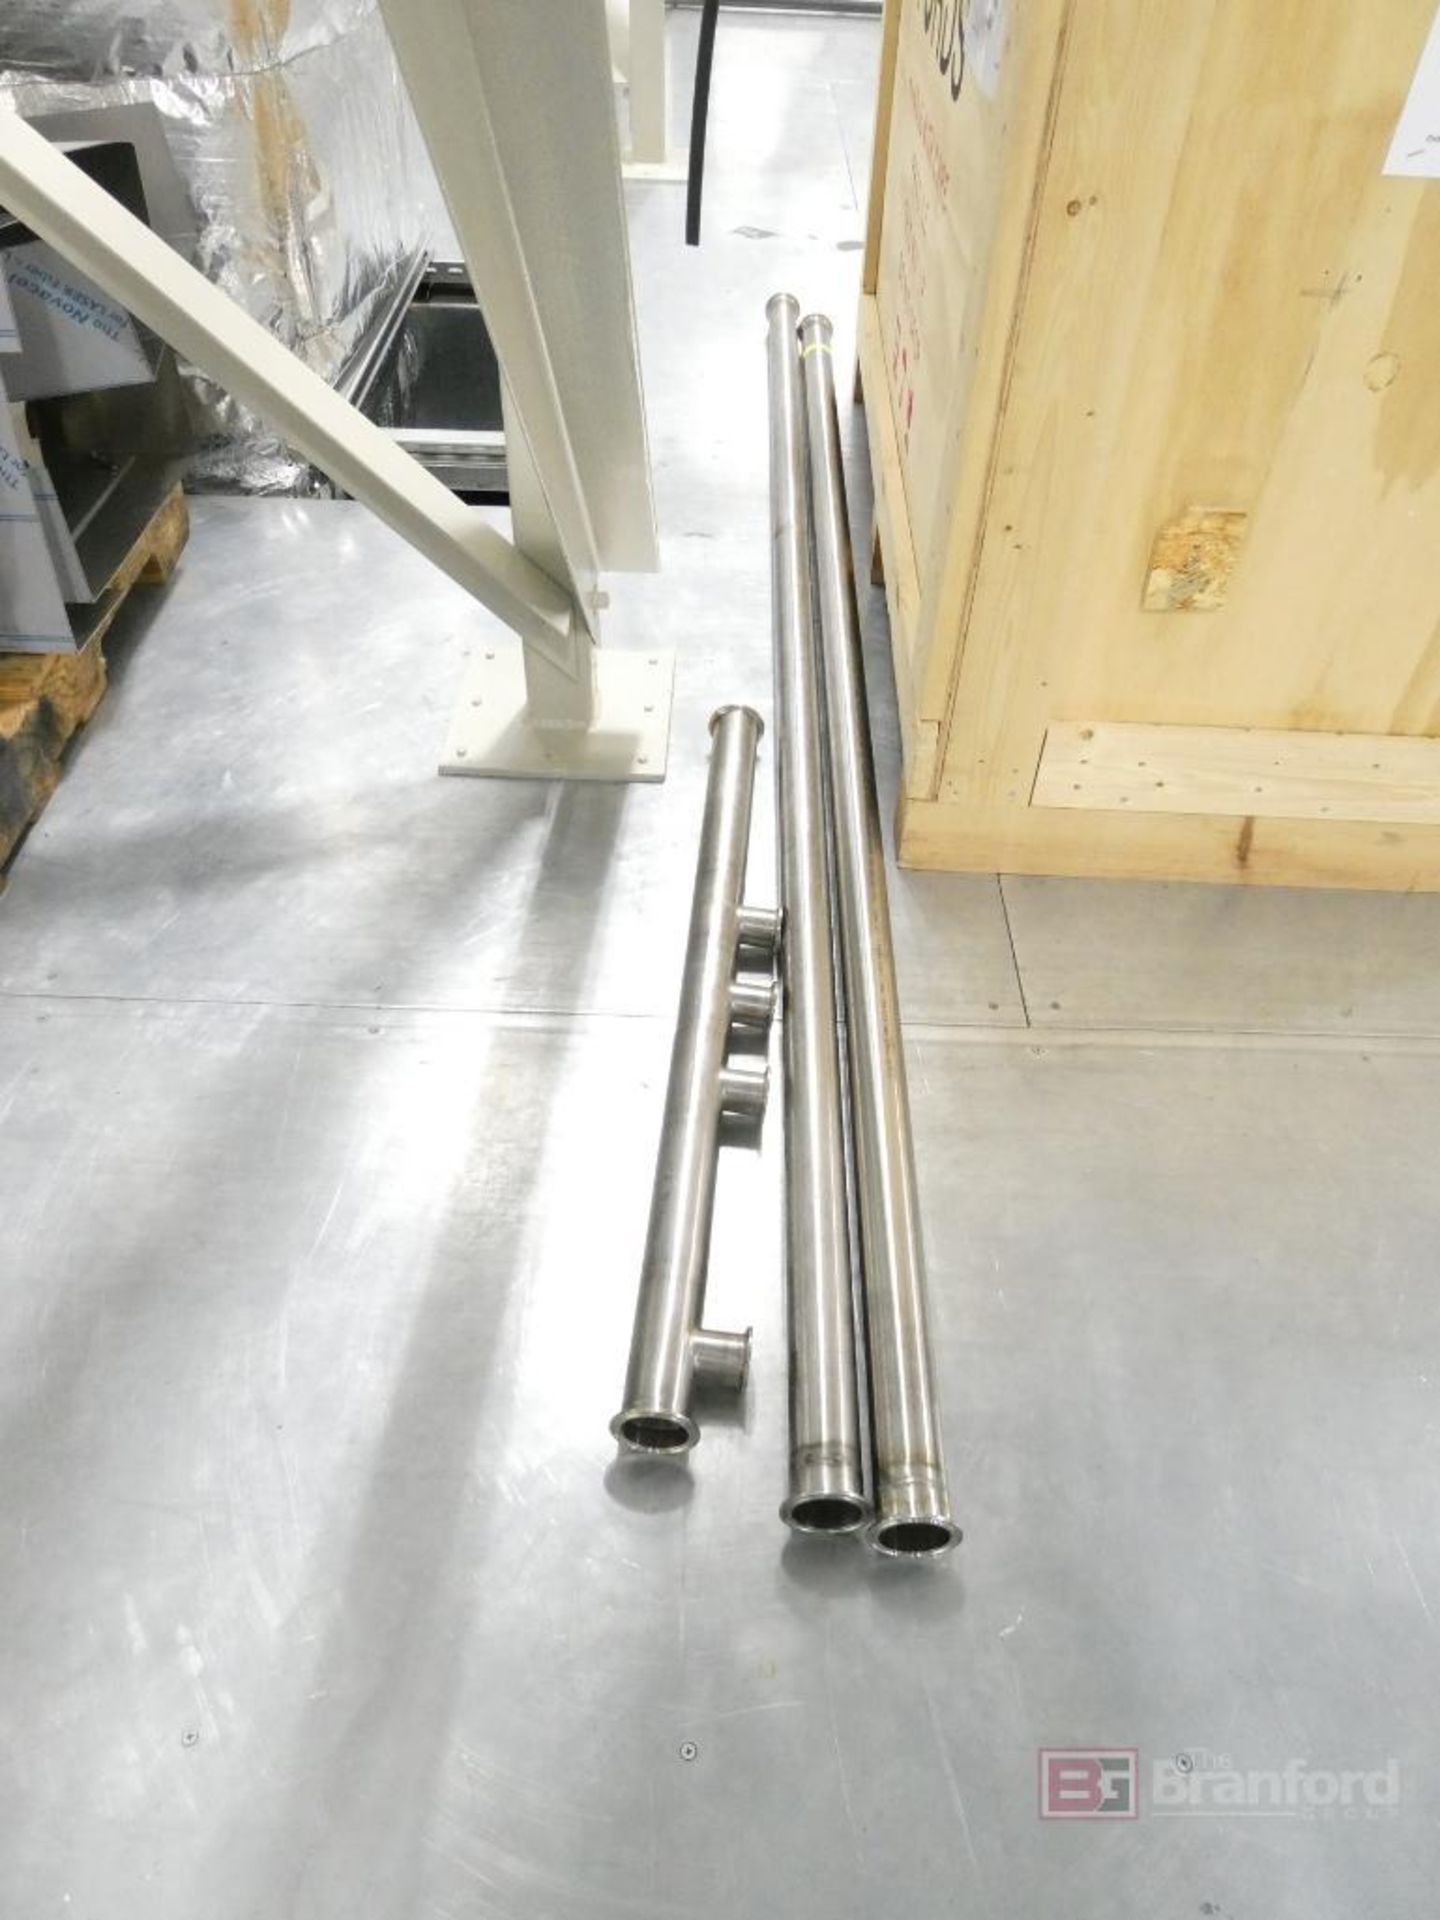 Lot of Fords Packaging Systems Stainless Steel Piping; Rods; Casings and Covers - Image 6 of 11